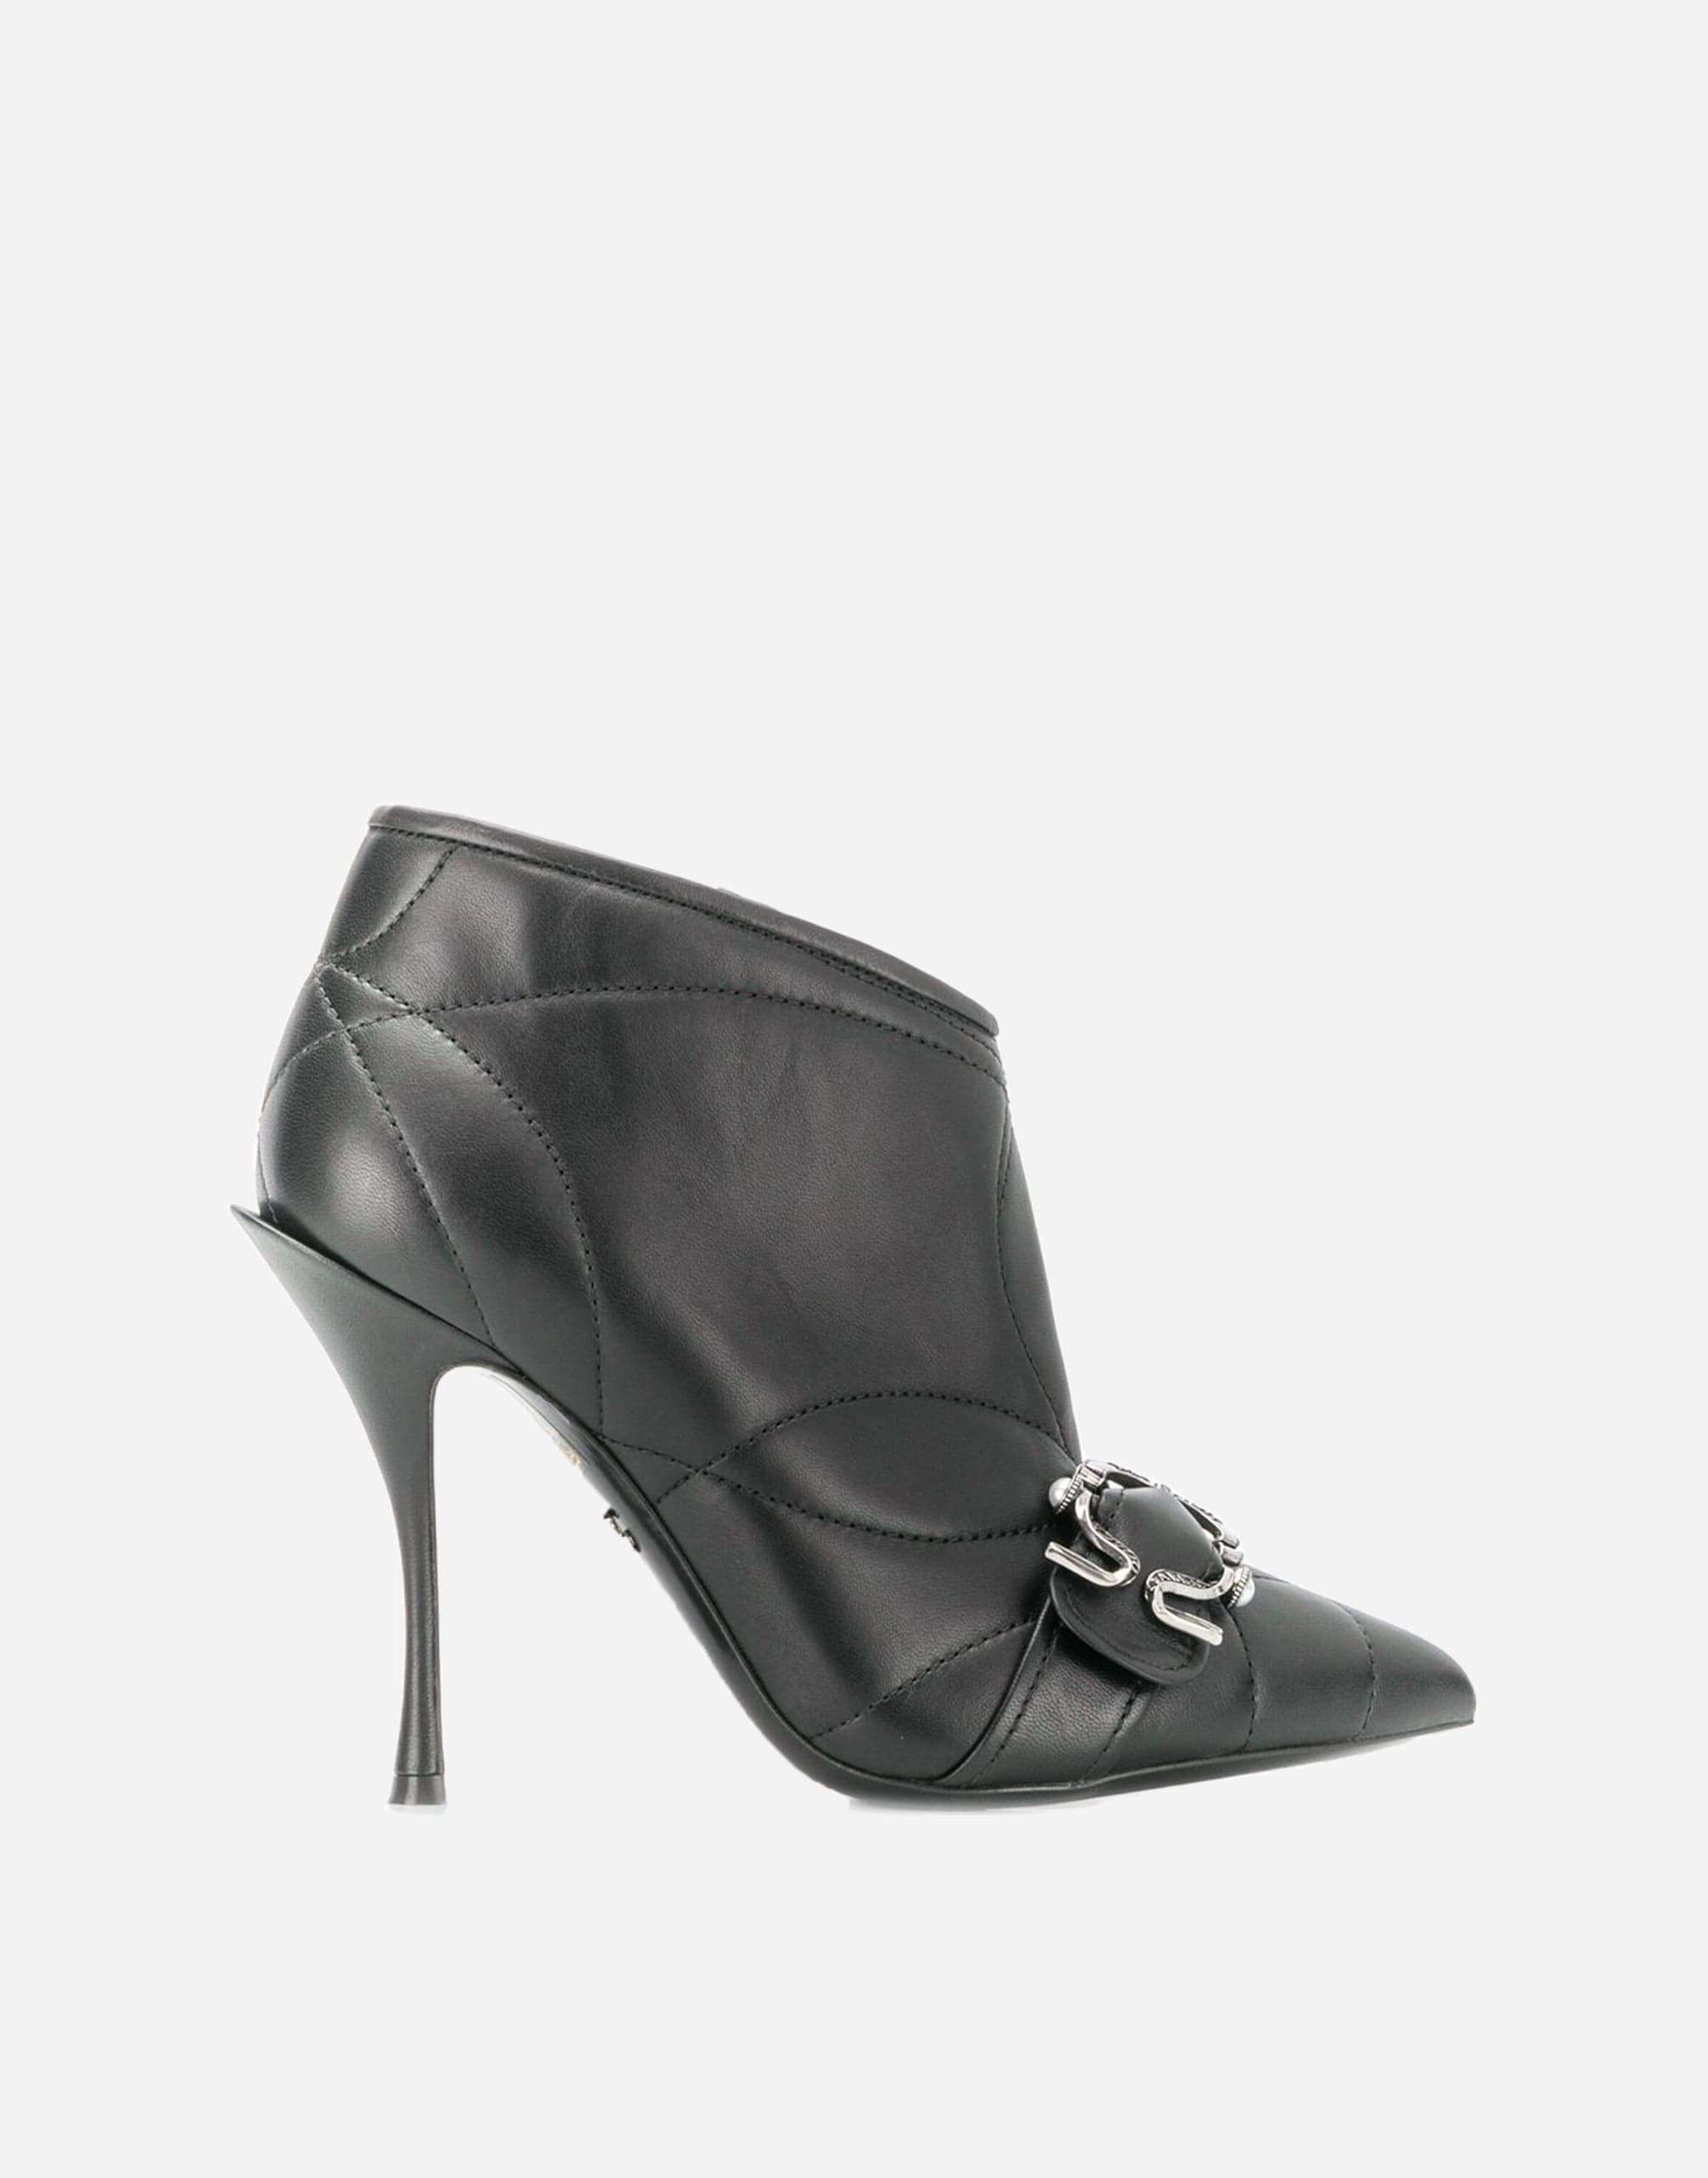 Dolce & Gabbana Quilted Buckled Devotion Booties